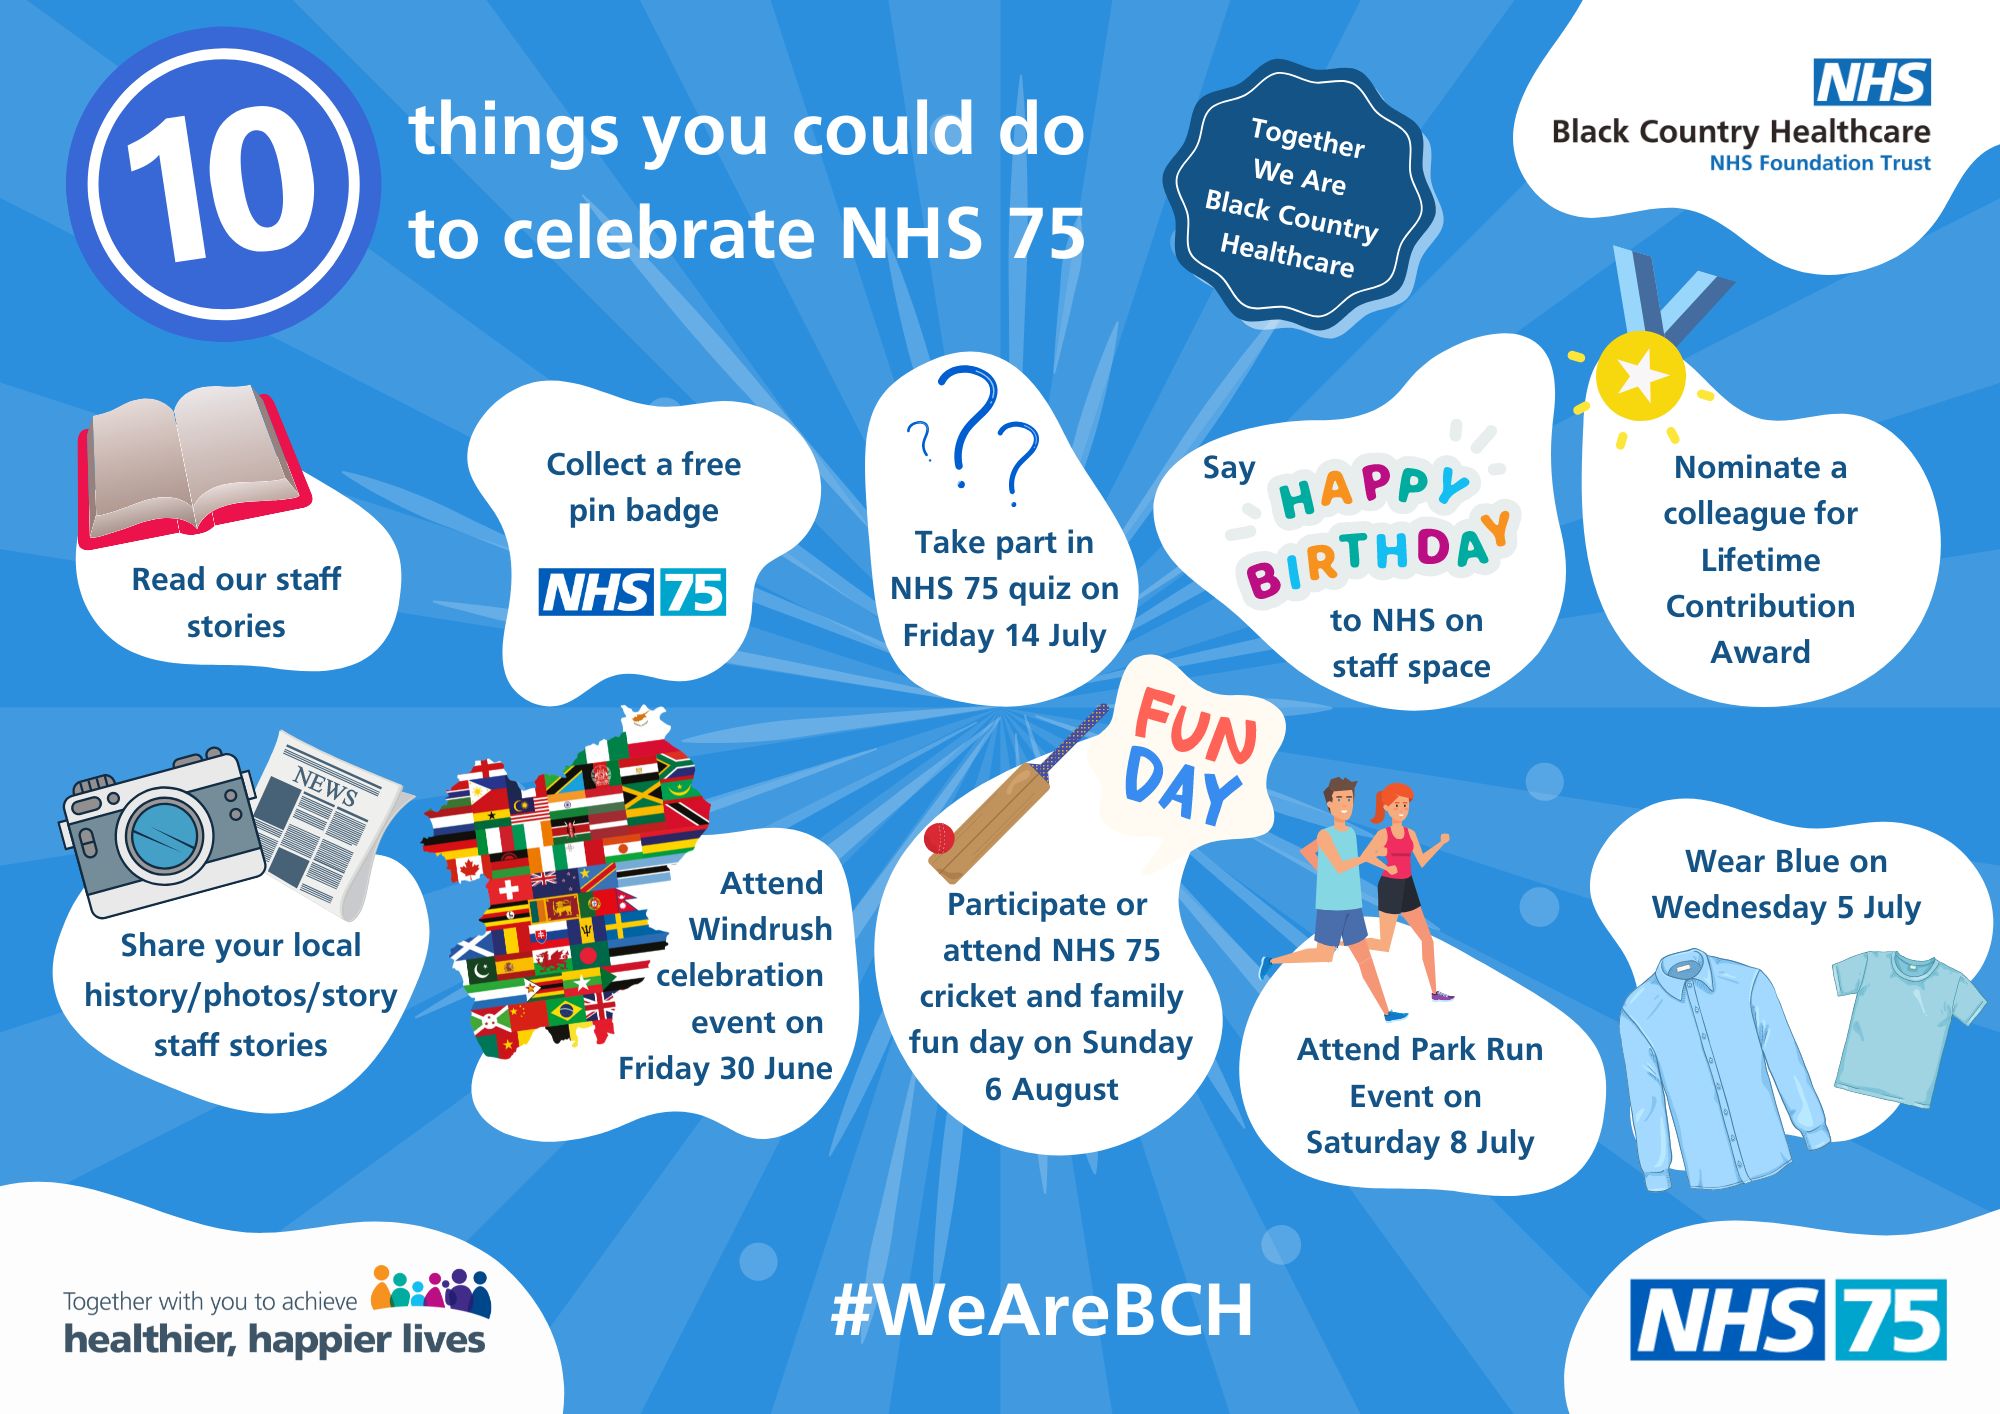 10 things to do to celebrate NHS75.jpg